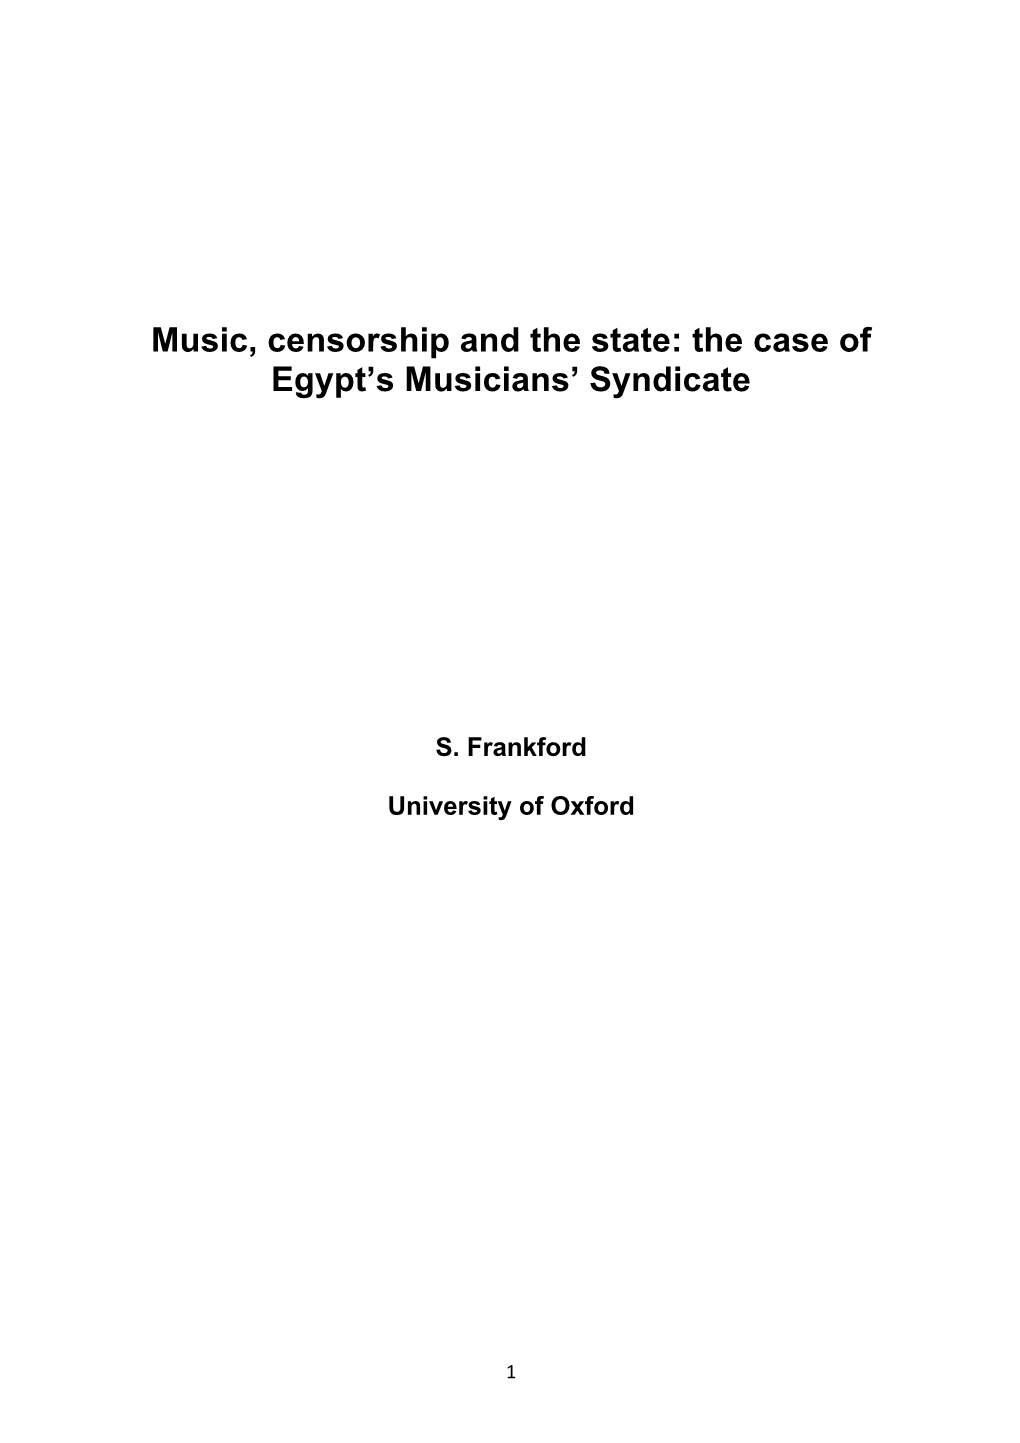 Music, Censorship and the State: the Case of Egypt’S Musicians’ Syndicate